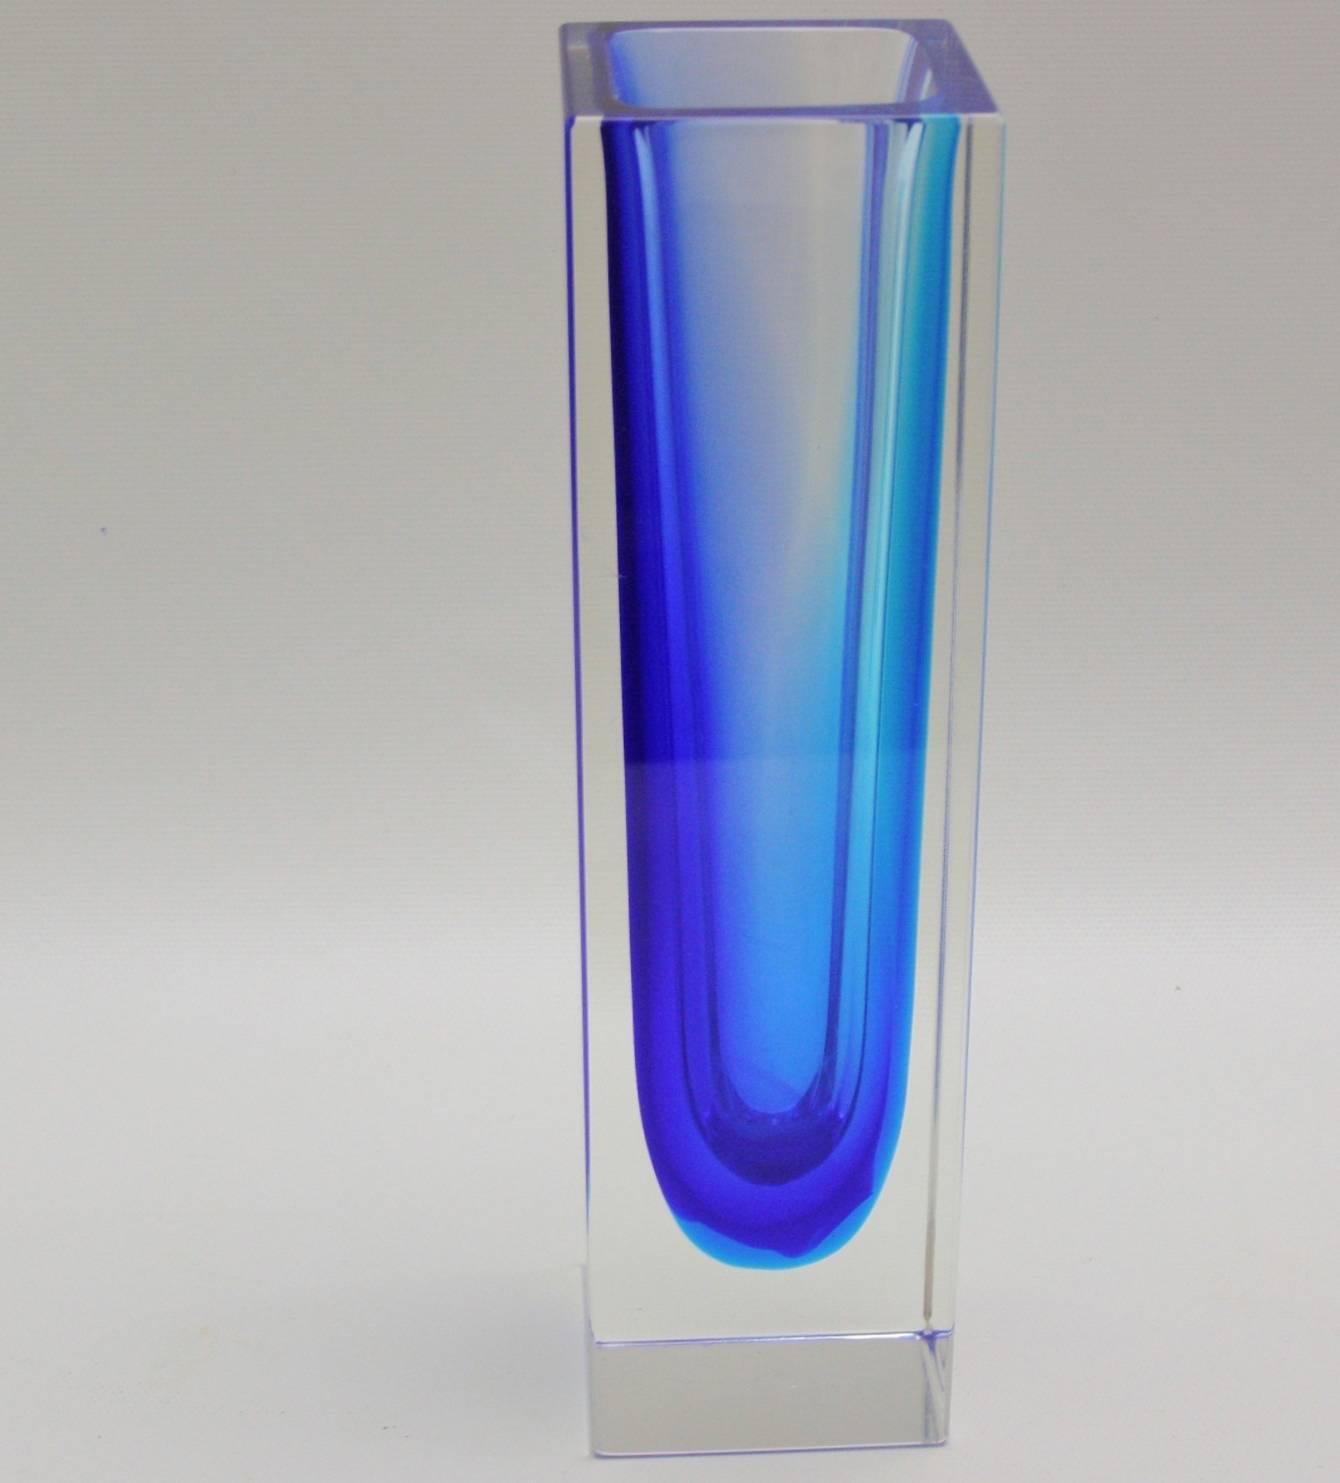 Gorgeous Alessandro Mandruzzato Murano glass vase in the summerso technique with a lighter blue surrounding the darker blue. Great with a bunch of short flowers or as is for display.